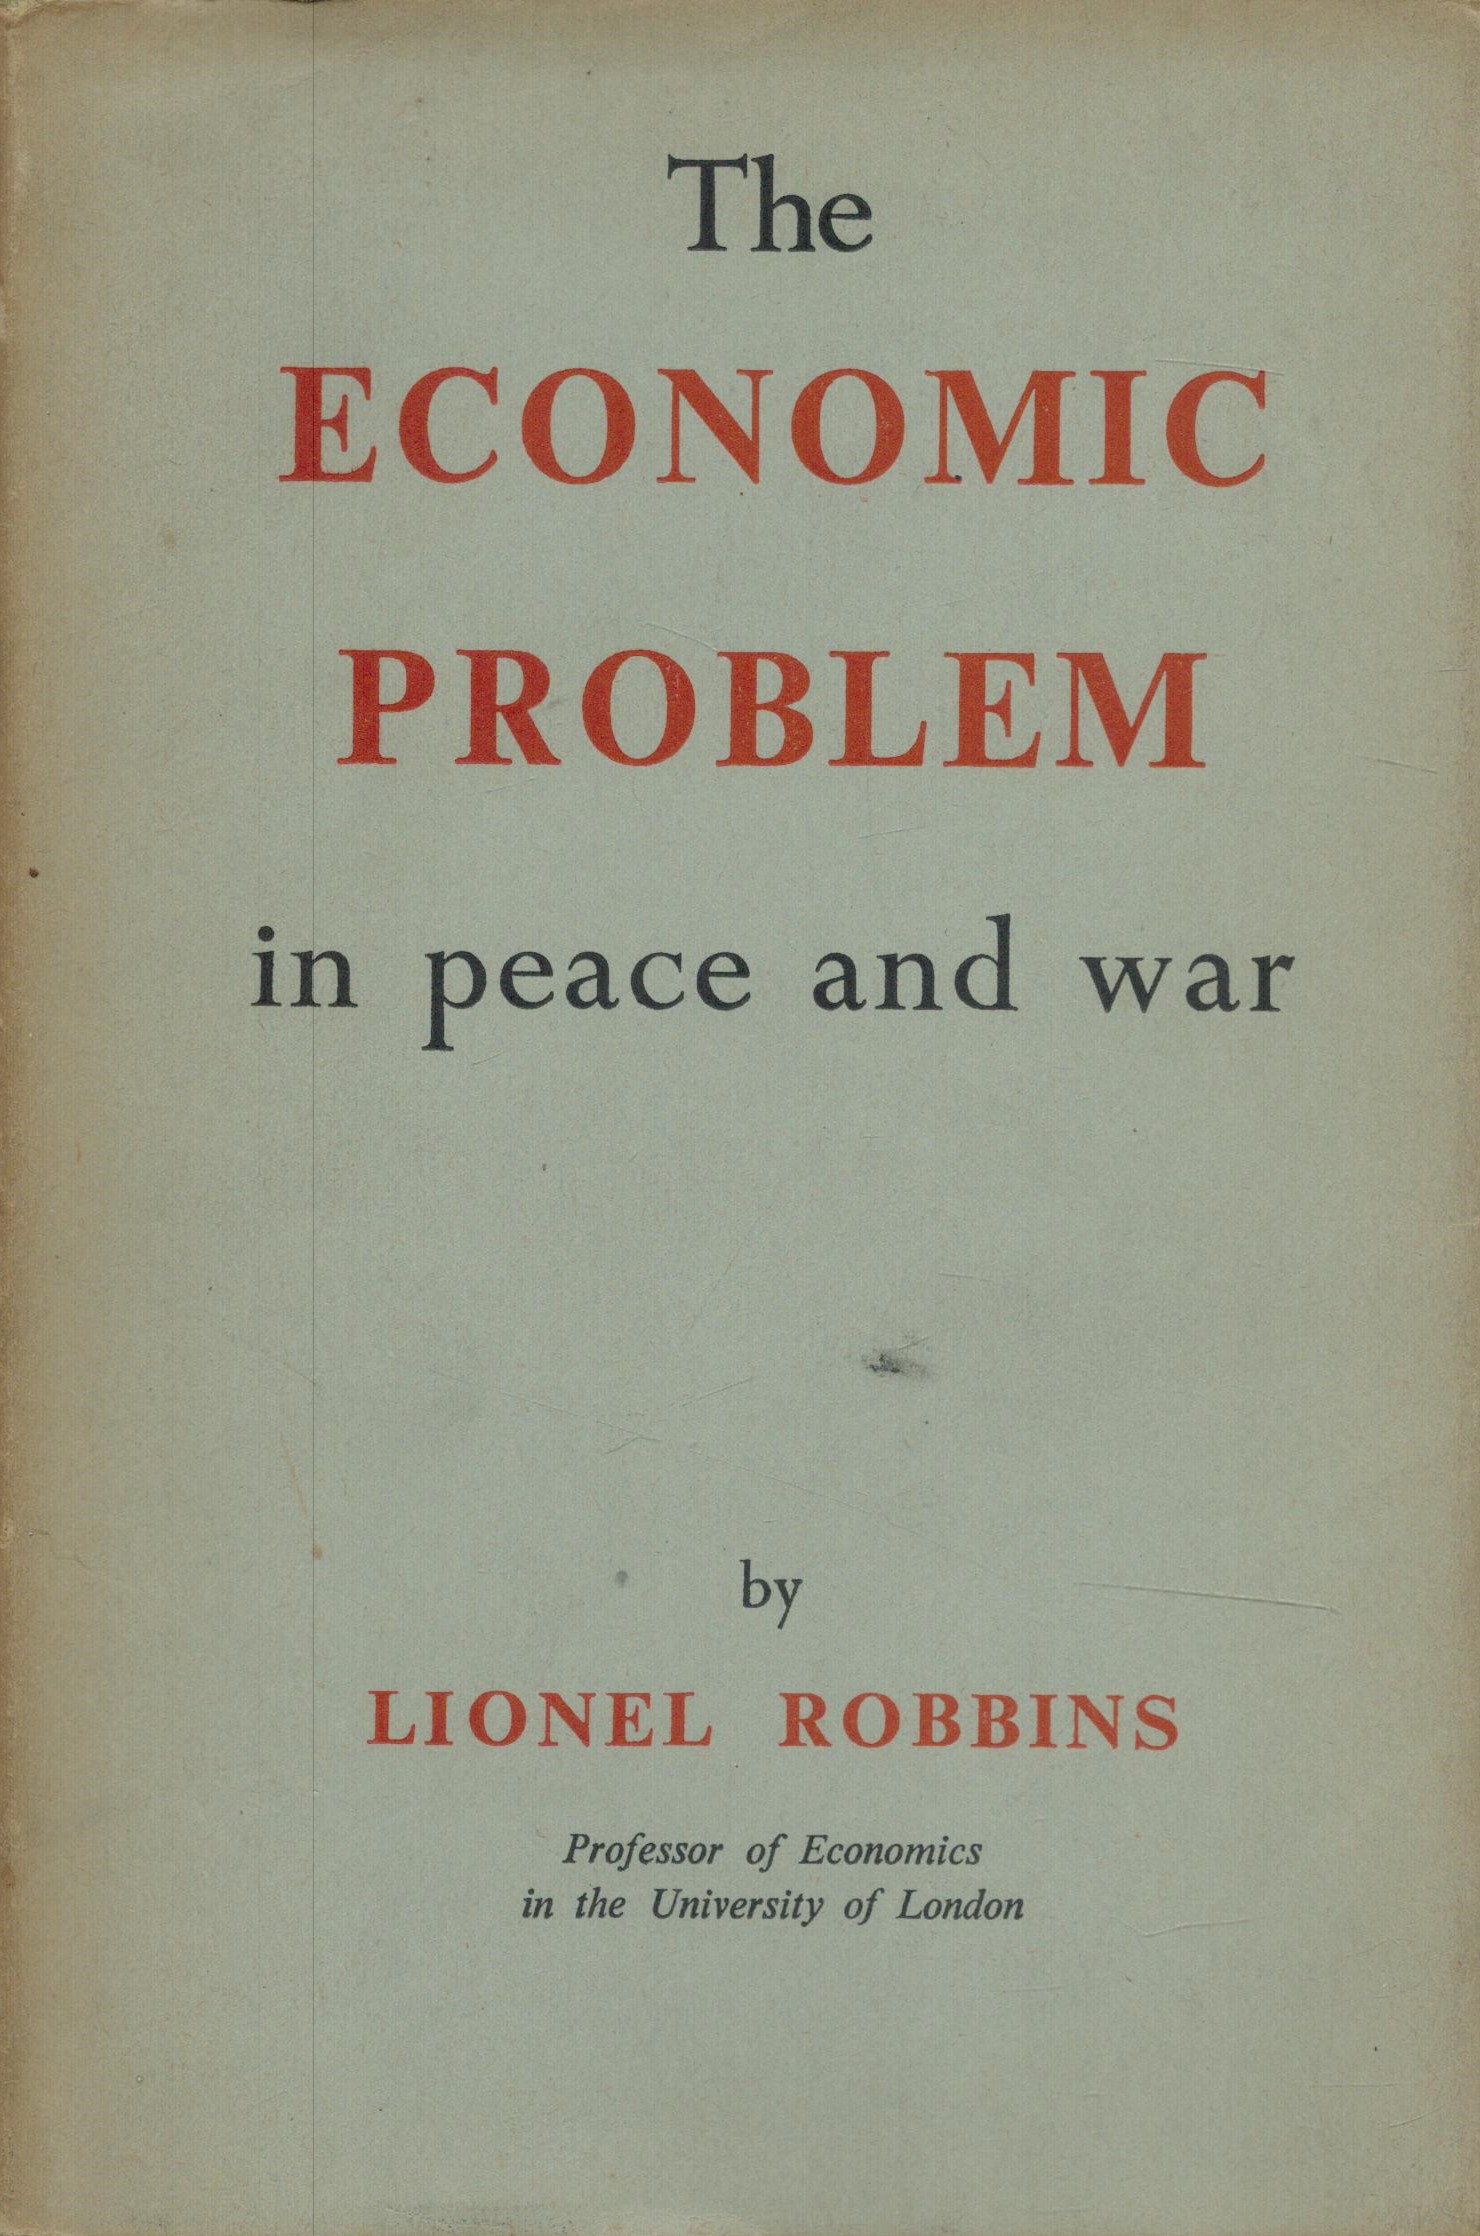 Lionel Robbins The Economic Problem In Peace and War. Published by Macmillan and Co. London. 1947.